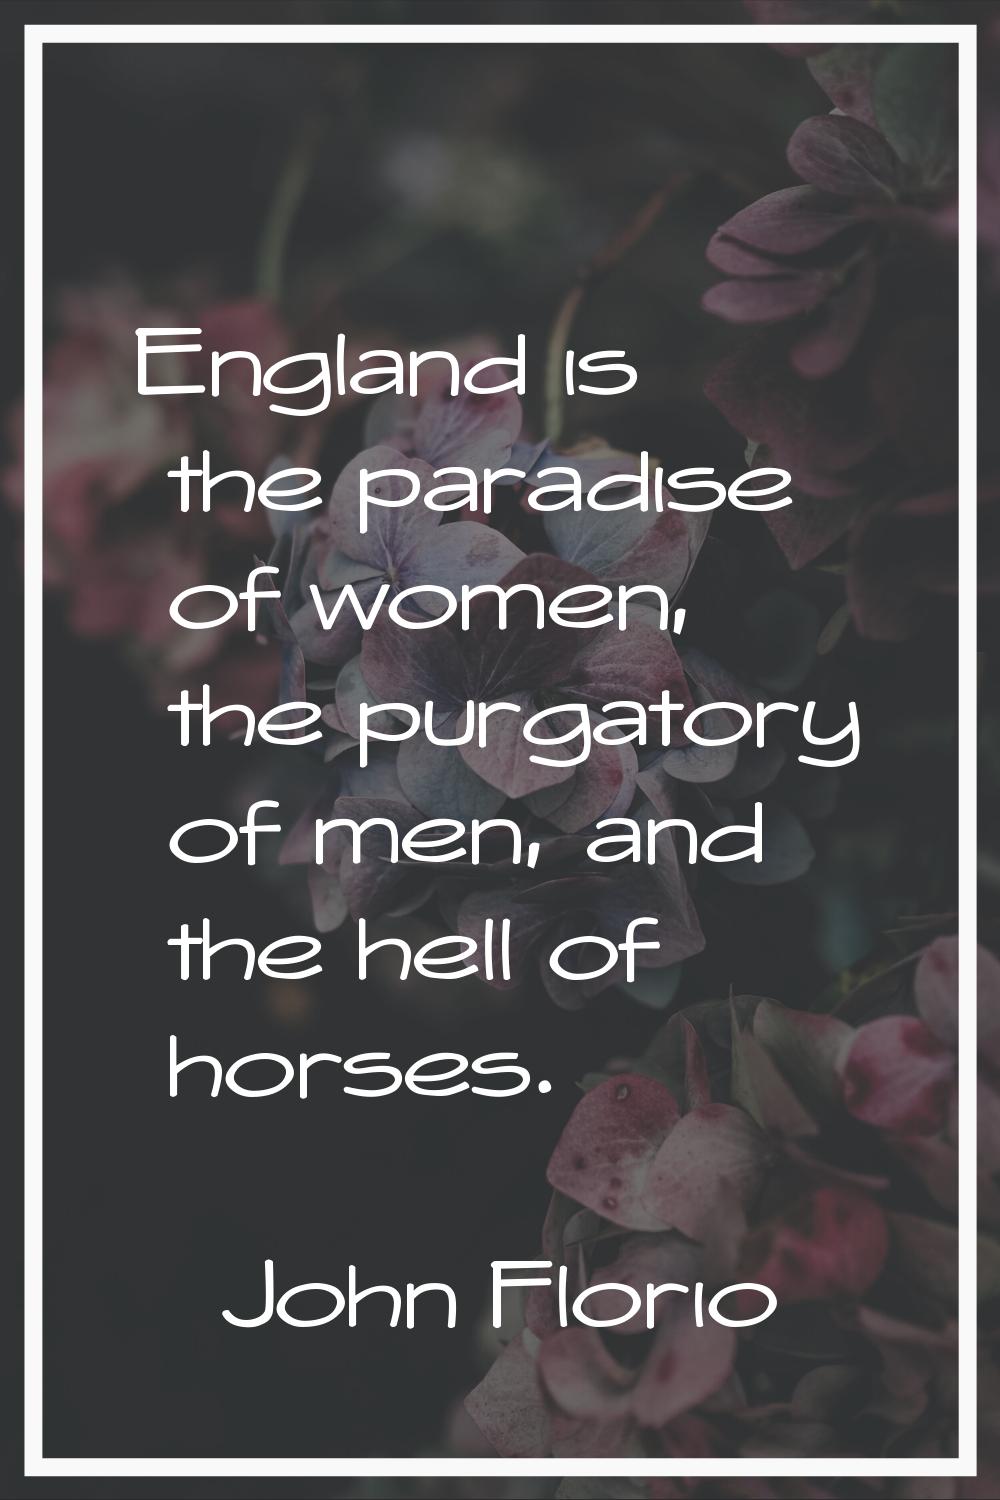 England is the paradise of women, the purgatory of men, and the hell of horses.